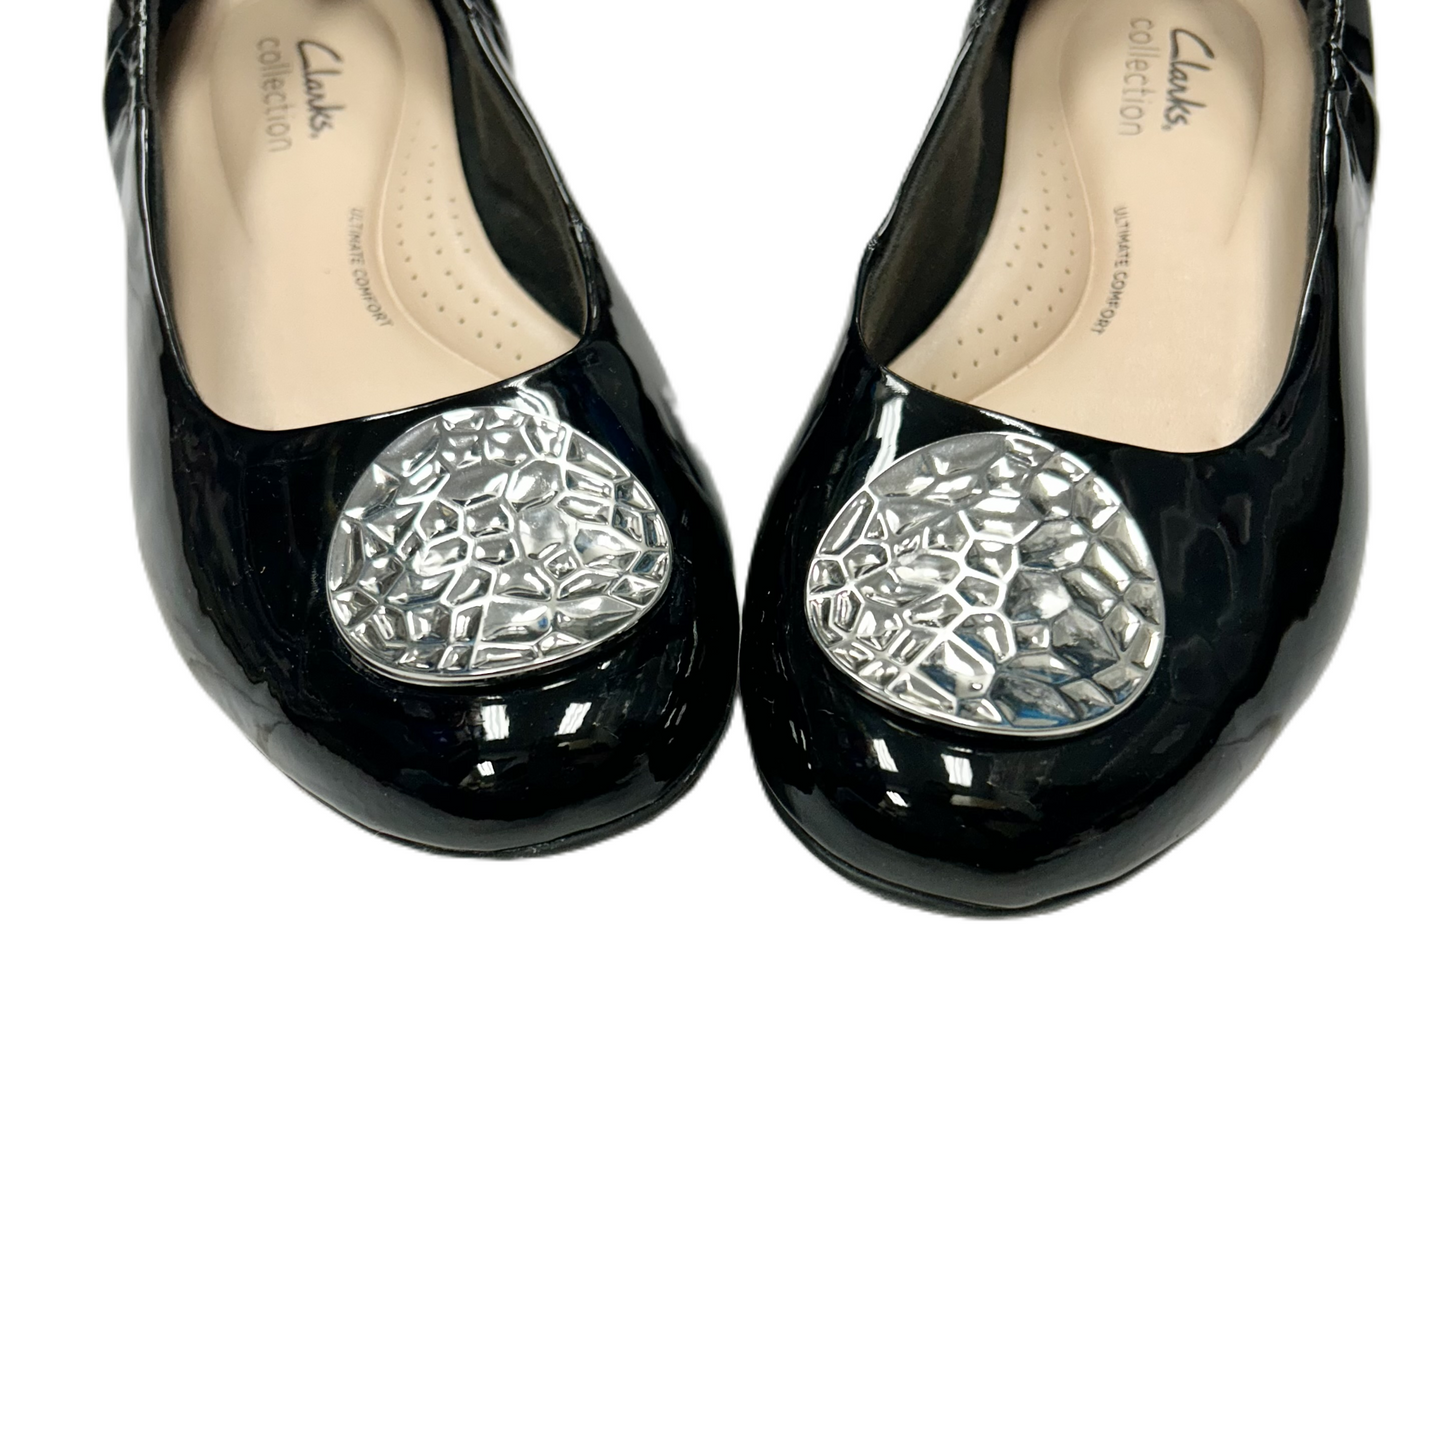 Black & Silver Shoes Flats By Clarks, Size: 7